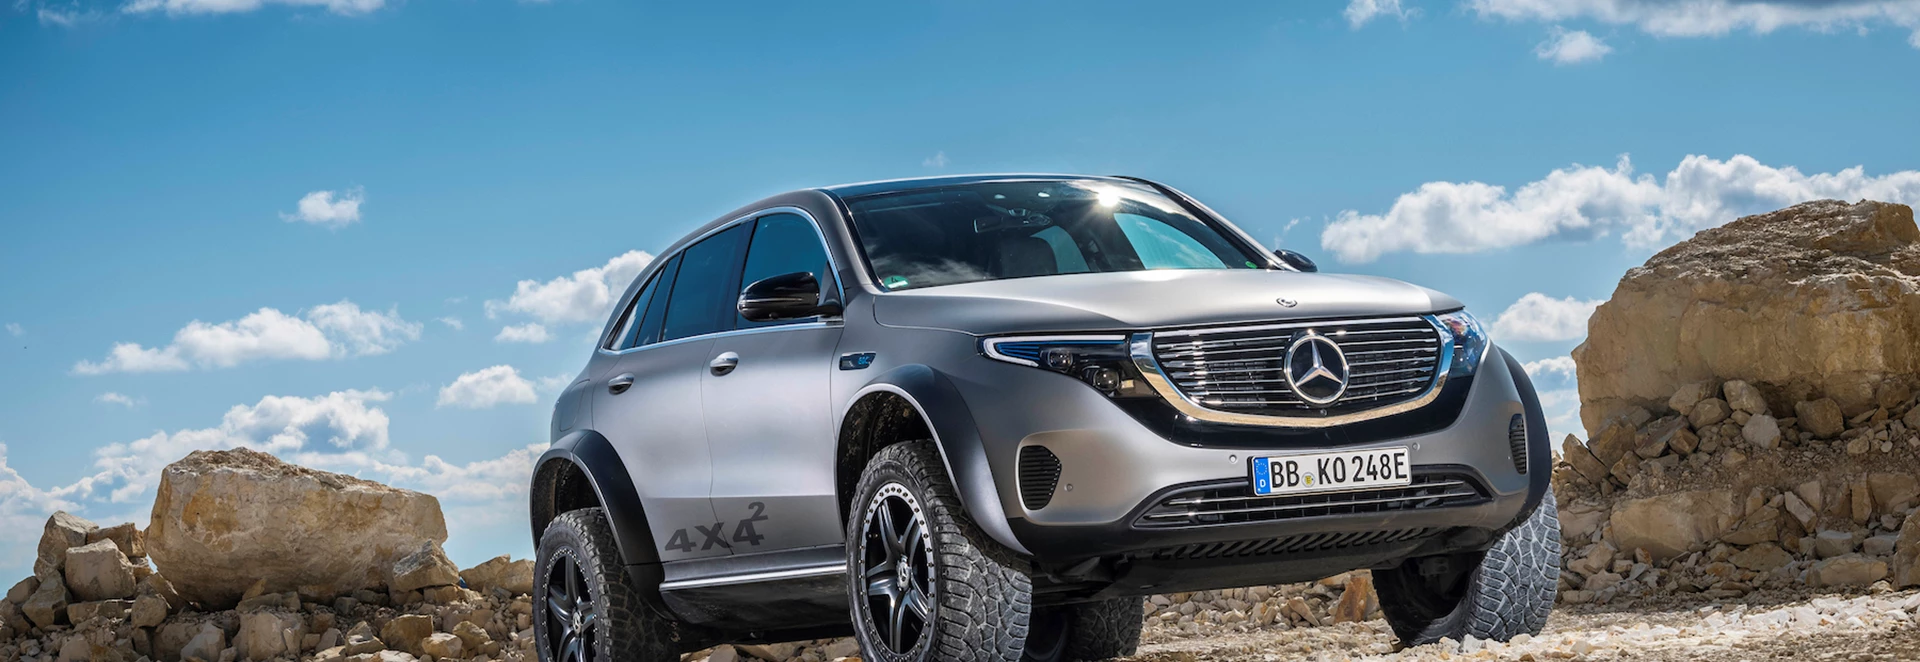 Mercedes create extreme off-roader based on electric EQC SUV 